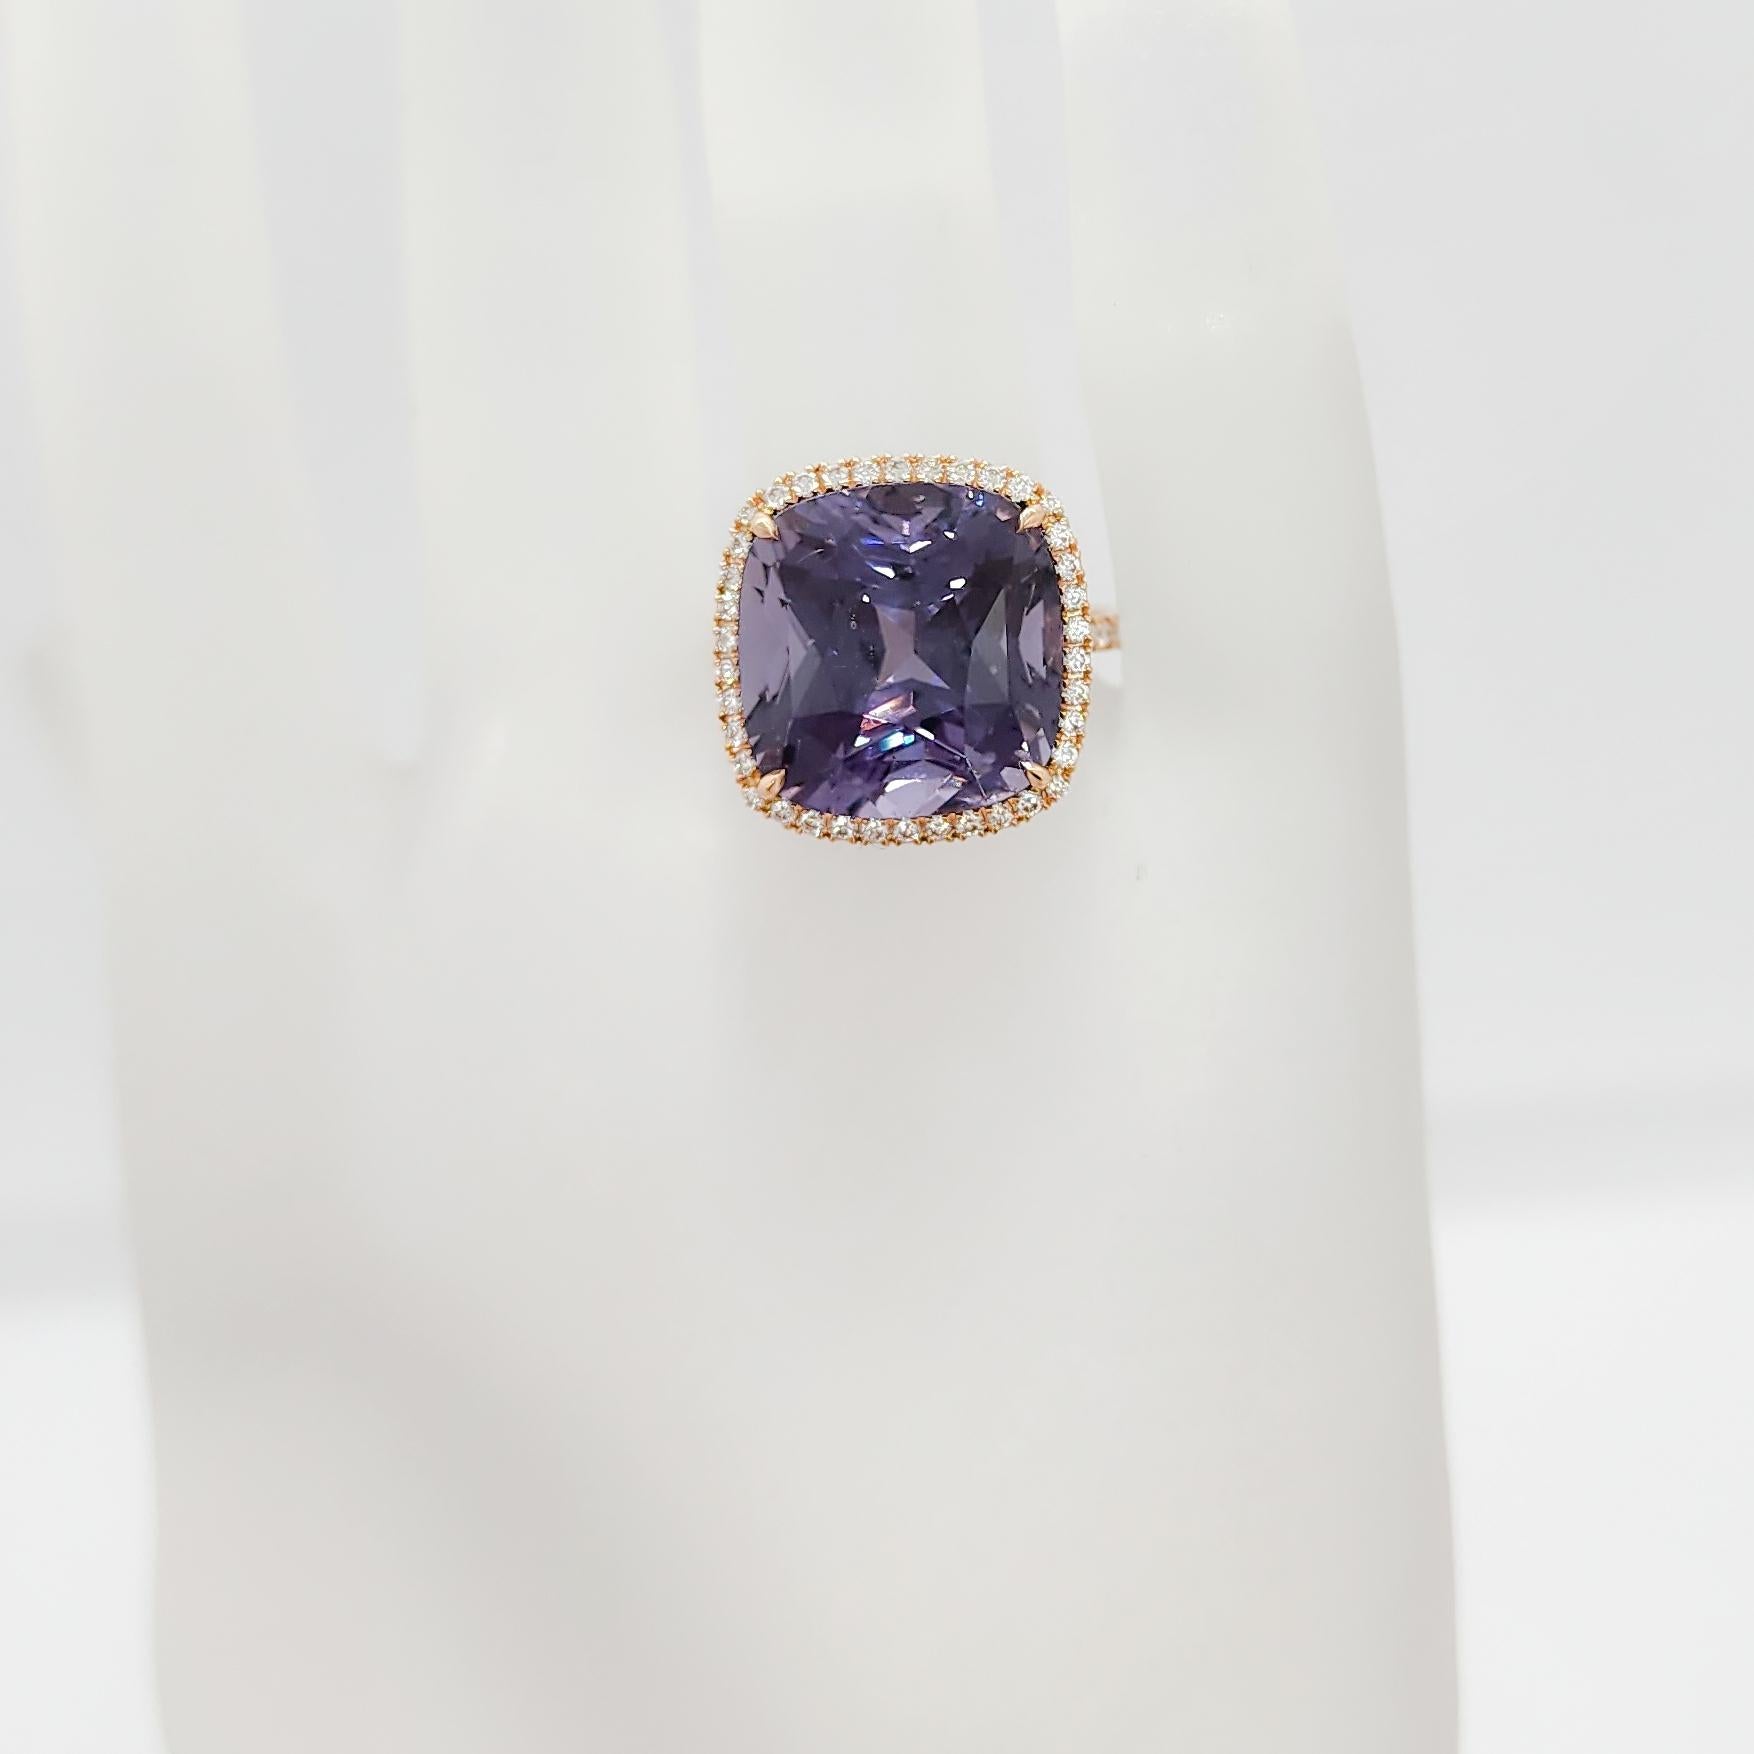 Breathtaking 13.69 ct. unheated purple spinel with 0.60 ct. good quality white diamond rounds.  Handmade in 18k rose gold.  Ring size 6.5.  GIA certificate included.